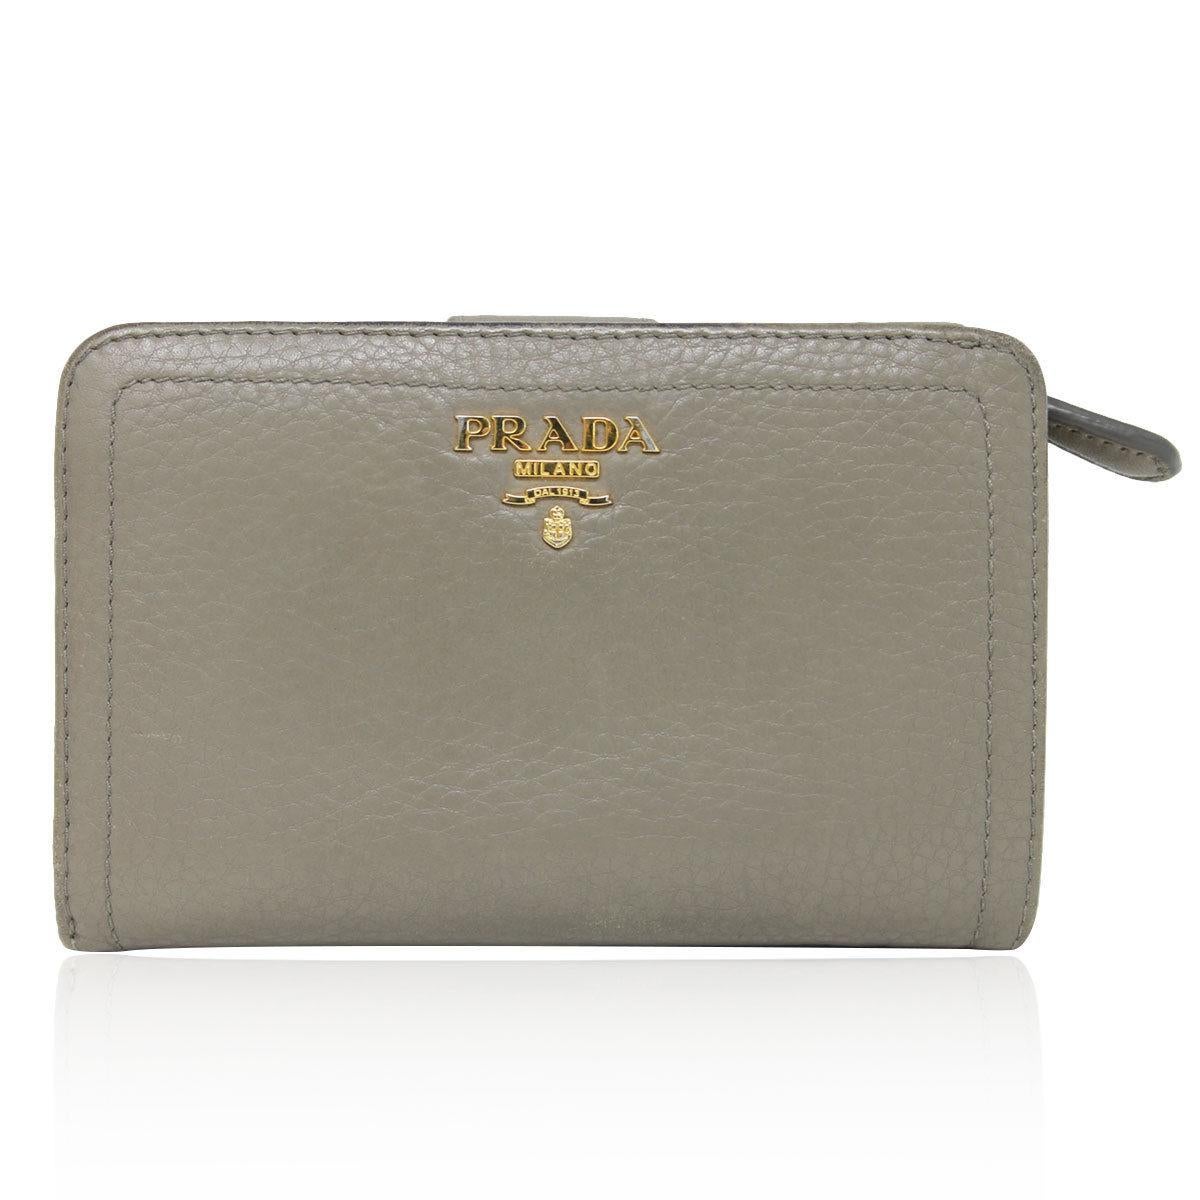 Brand: Prada
Style: Wallet
Measurements: 5.75″ x 1″ x 3.75″
Materials: Taupe/Argilla Leather
Hardware & Lining: Gold Tone Hardware, Taupe Leather Lining
Interior: 1 Zipper Coin Pouch, 10 Cards Slots, 4 Pocket compartments, 1 Banknote compartment